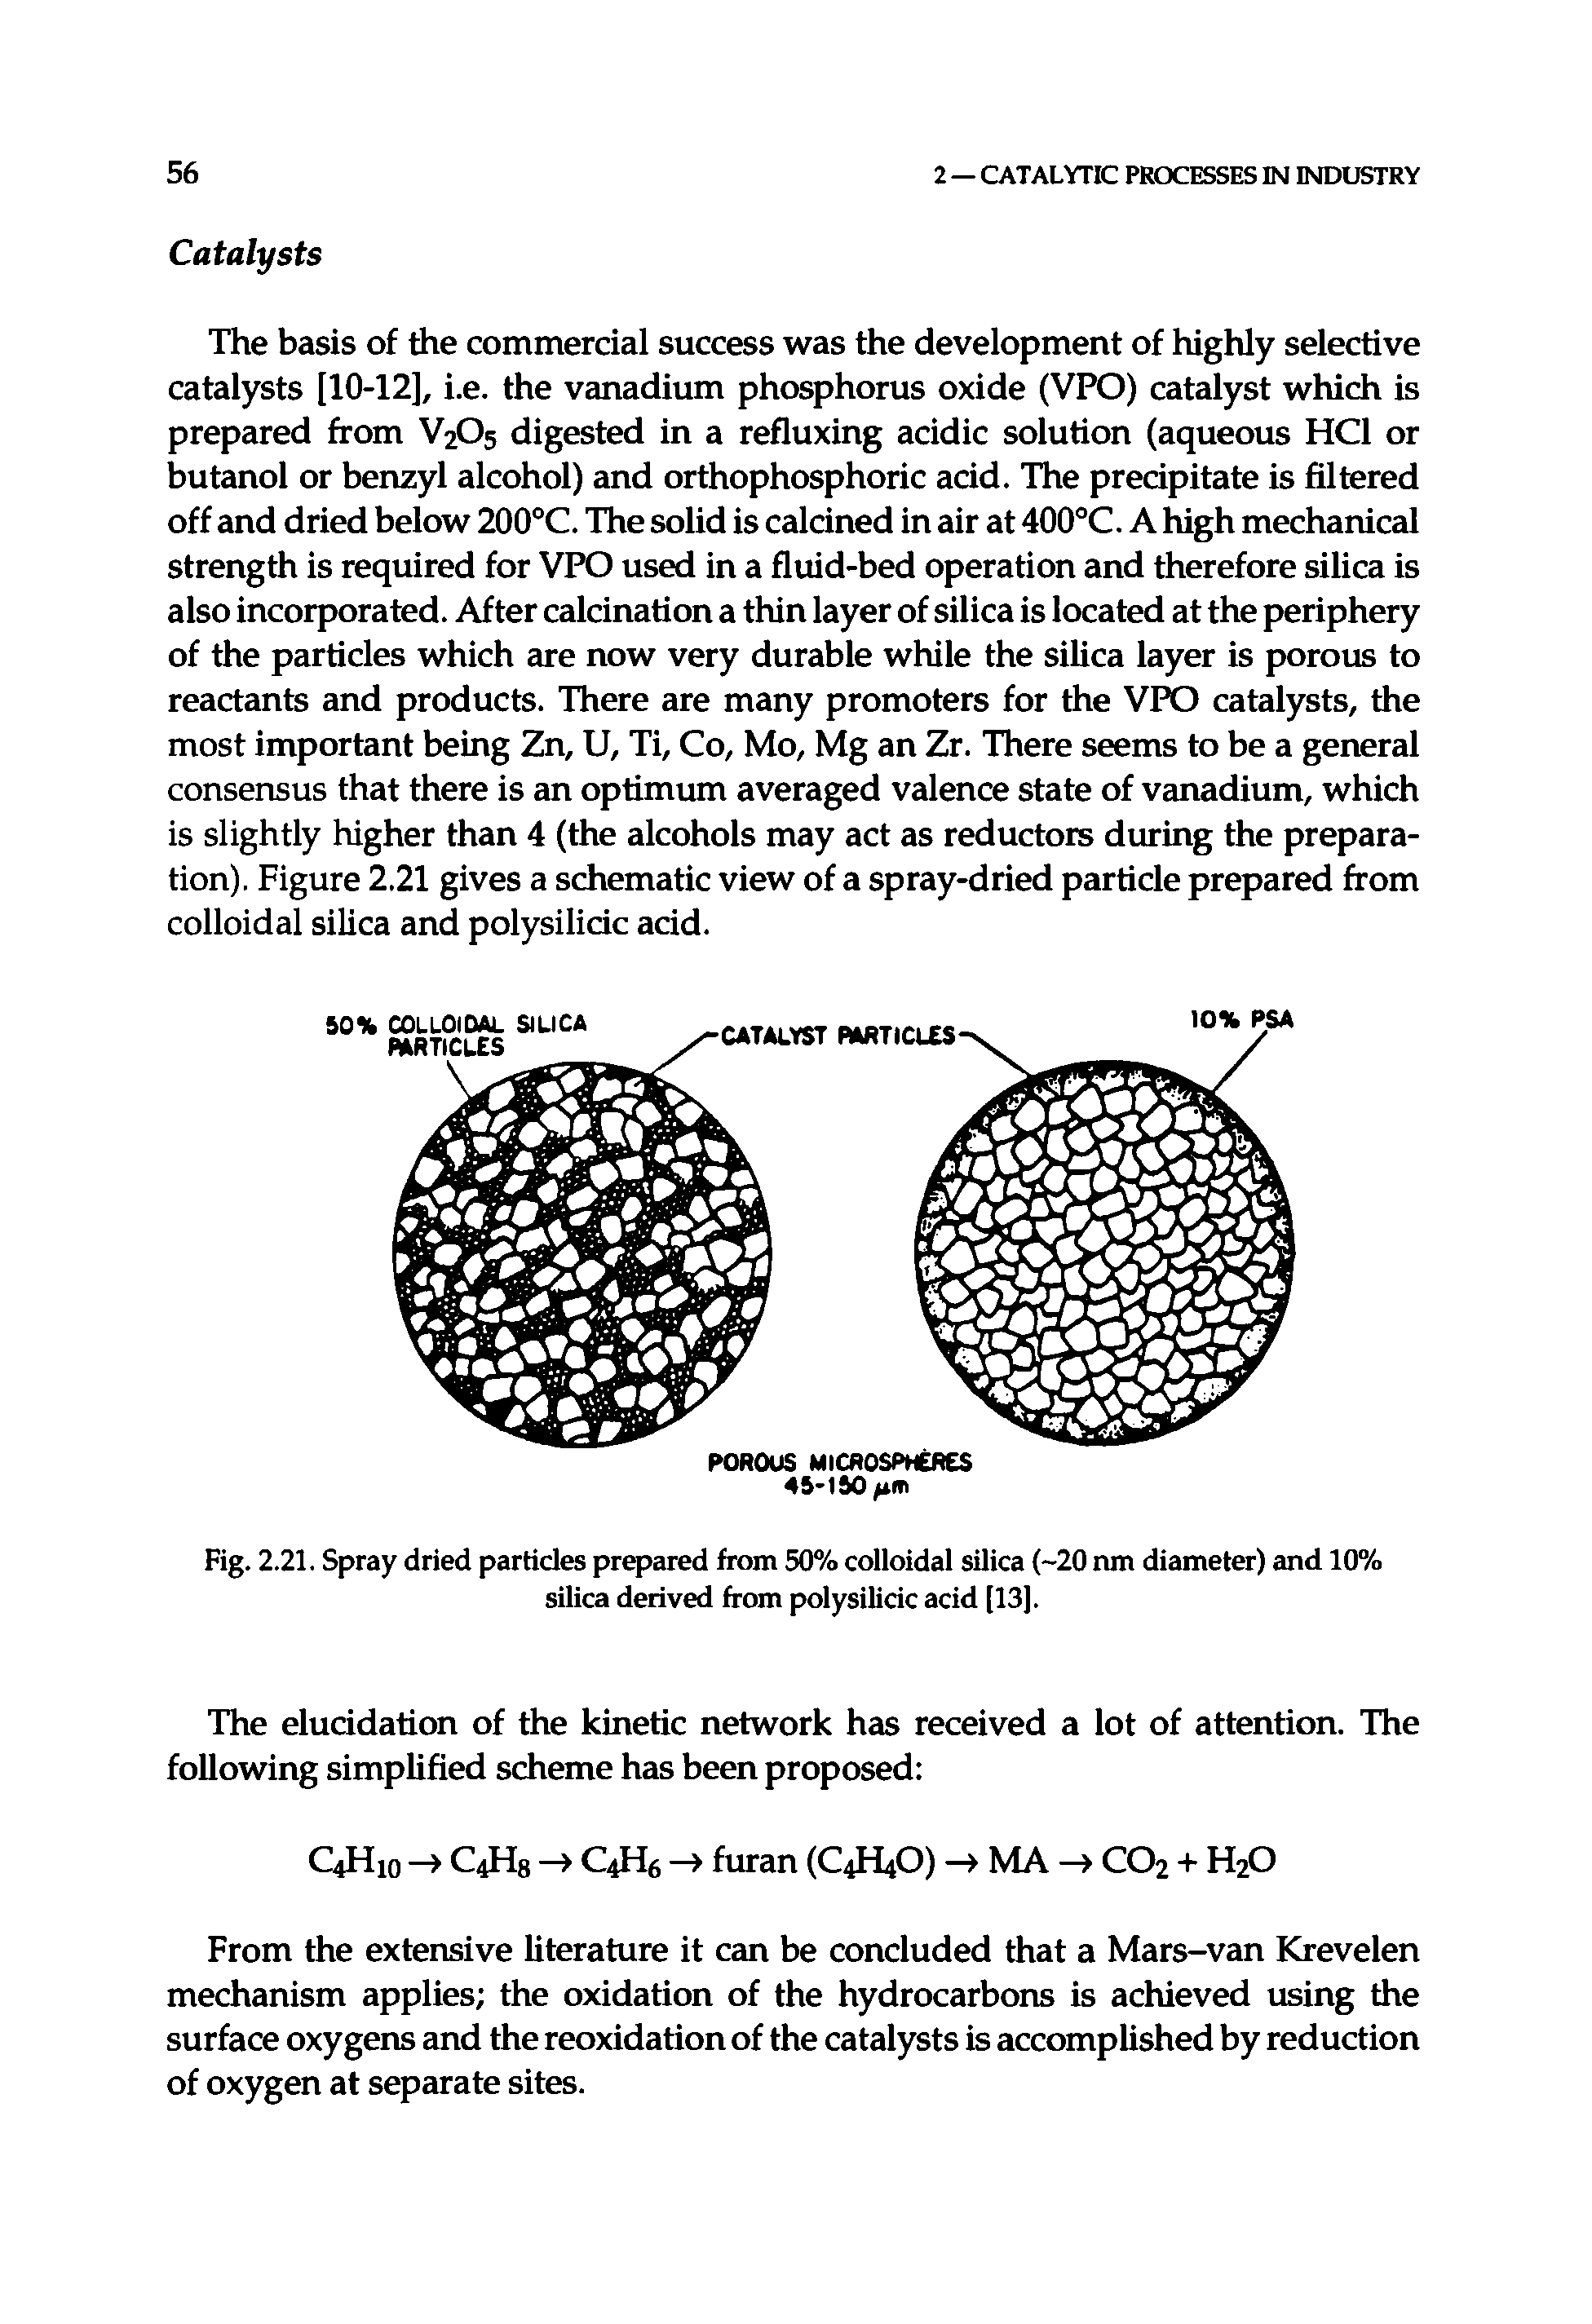 Fig. 2.21. Spray dried particles prepared from 50% colloidal silica (-20 nm diameter) and 10% silica derived from polysilicic acid [13].